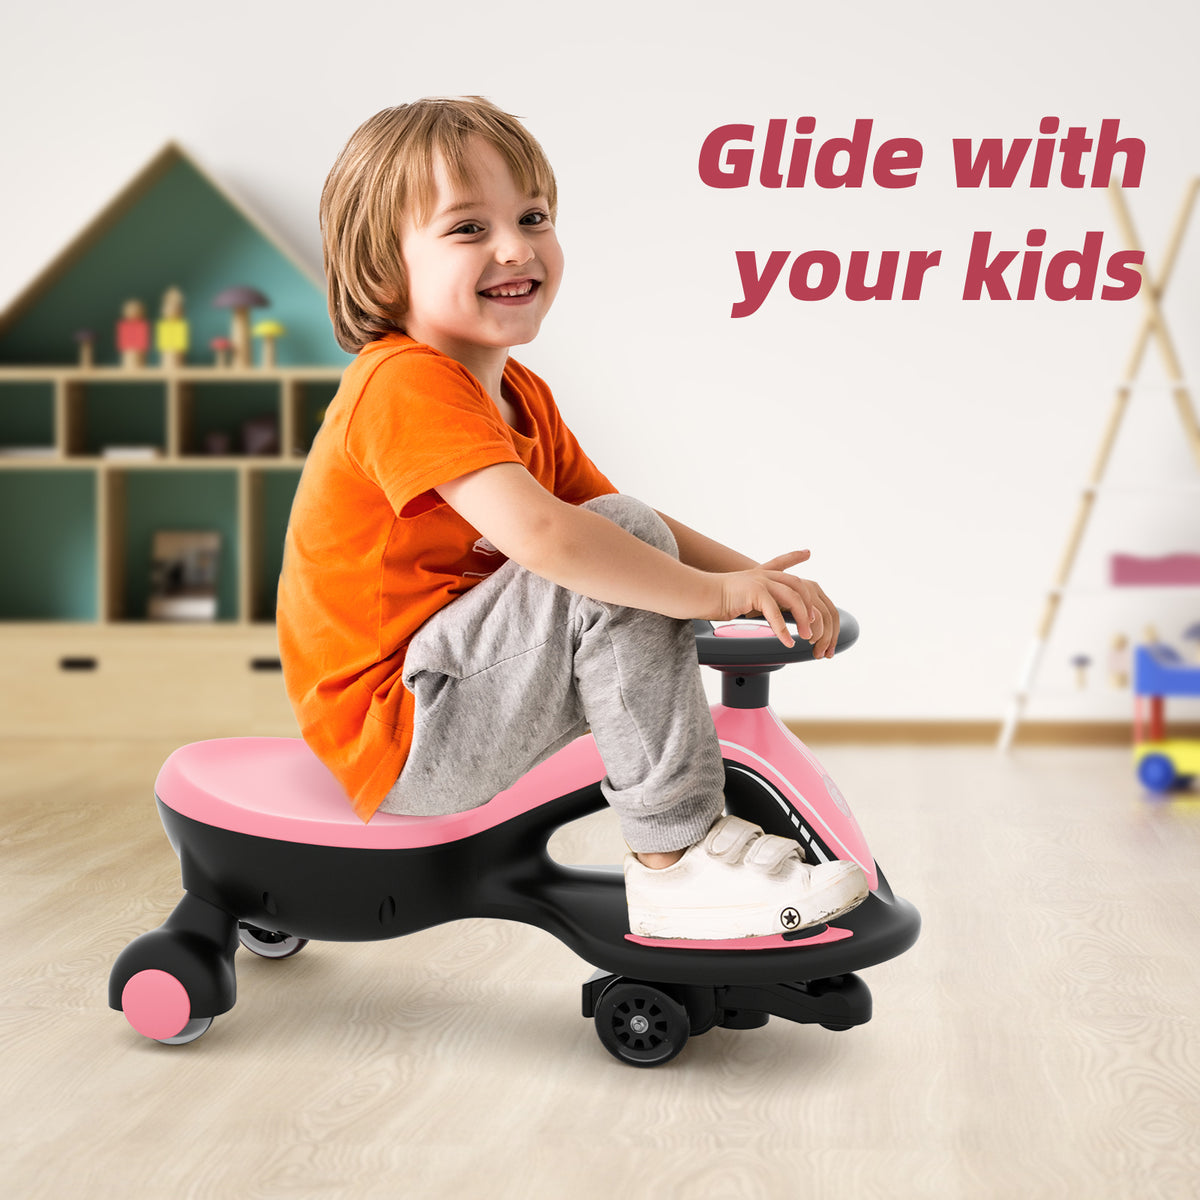 XJD 2 in 1 Electric Wiggle Car Pink In Stock USA